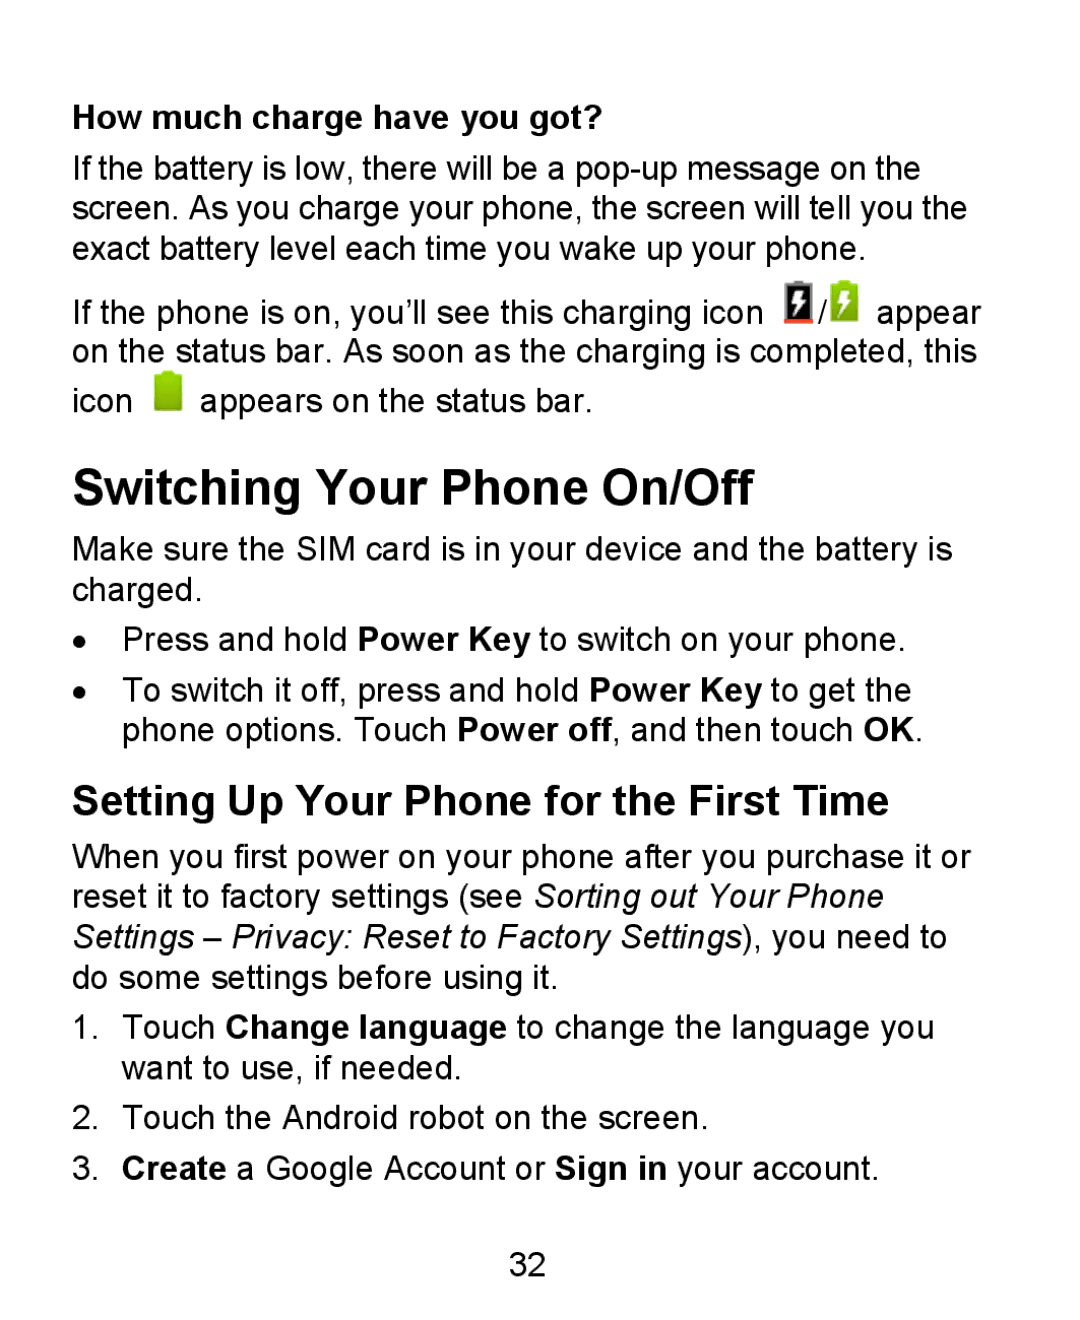 ZTE KIS user manual Switching Your Phone On/Off, Setting Up Your Phone for the First Time, How much charge have you got? 